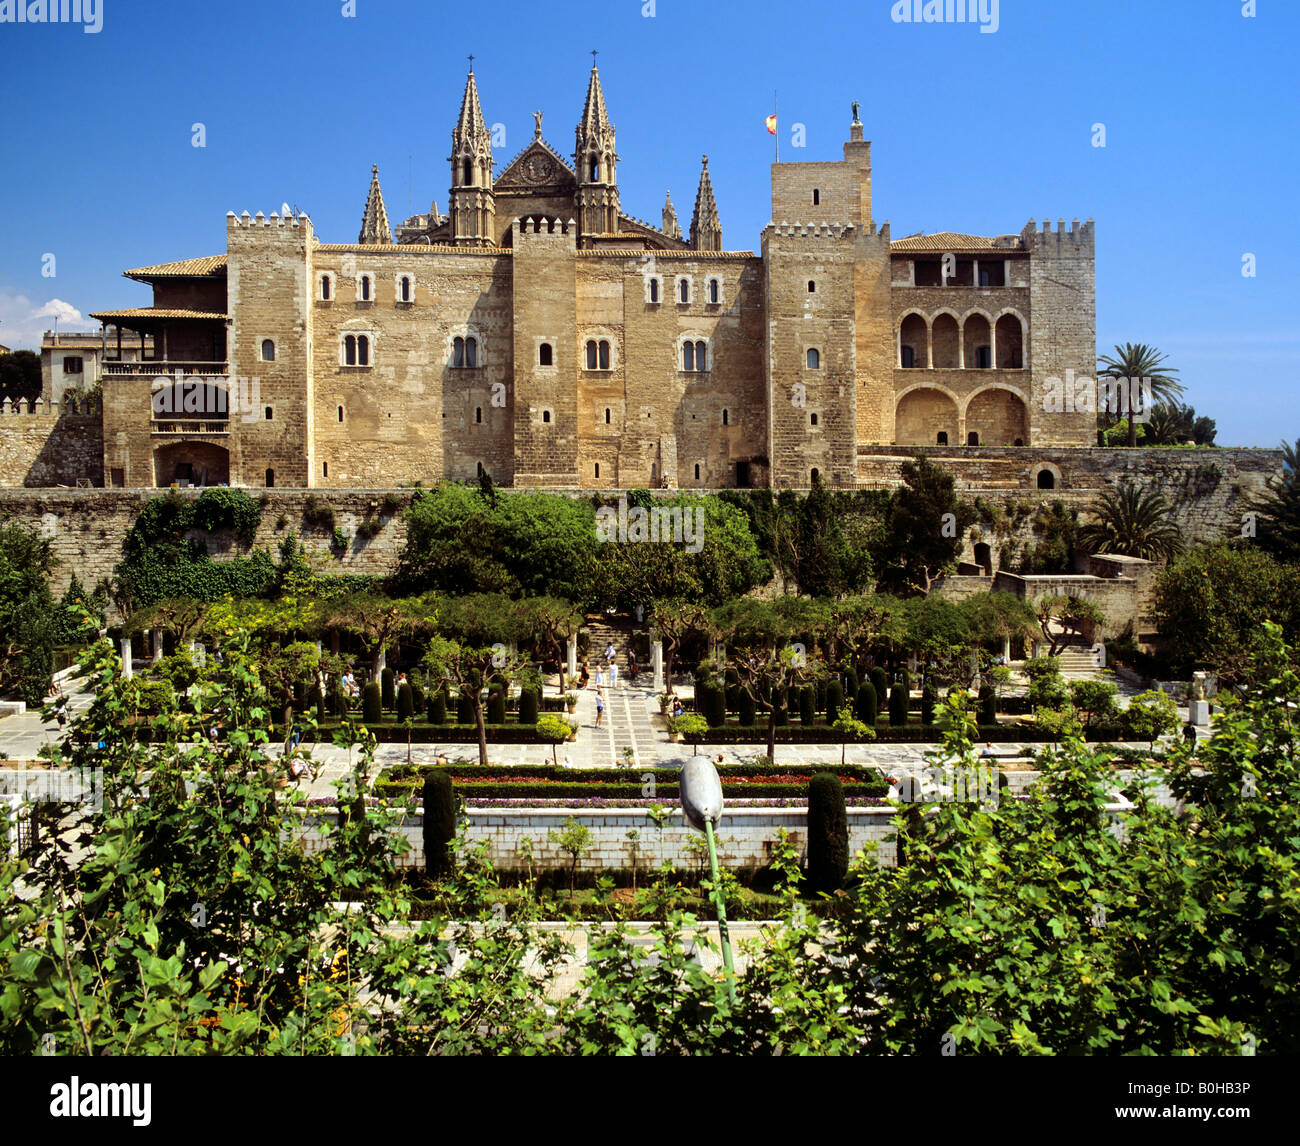 Towers of the La Seu Cathedral, west elevation, castle wall, park, Majorca, Balearic Islands, Spain Stock Photo